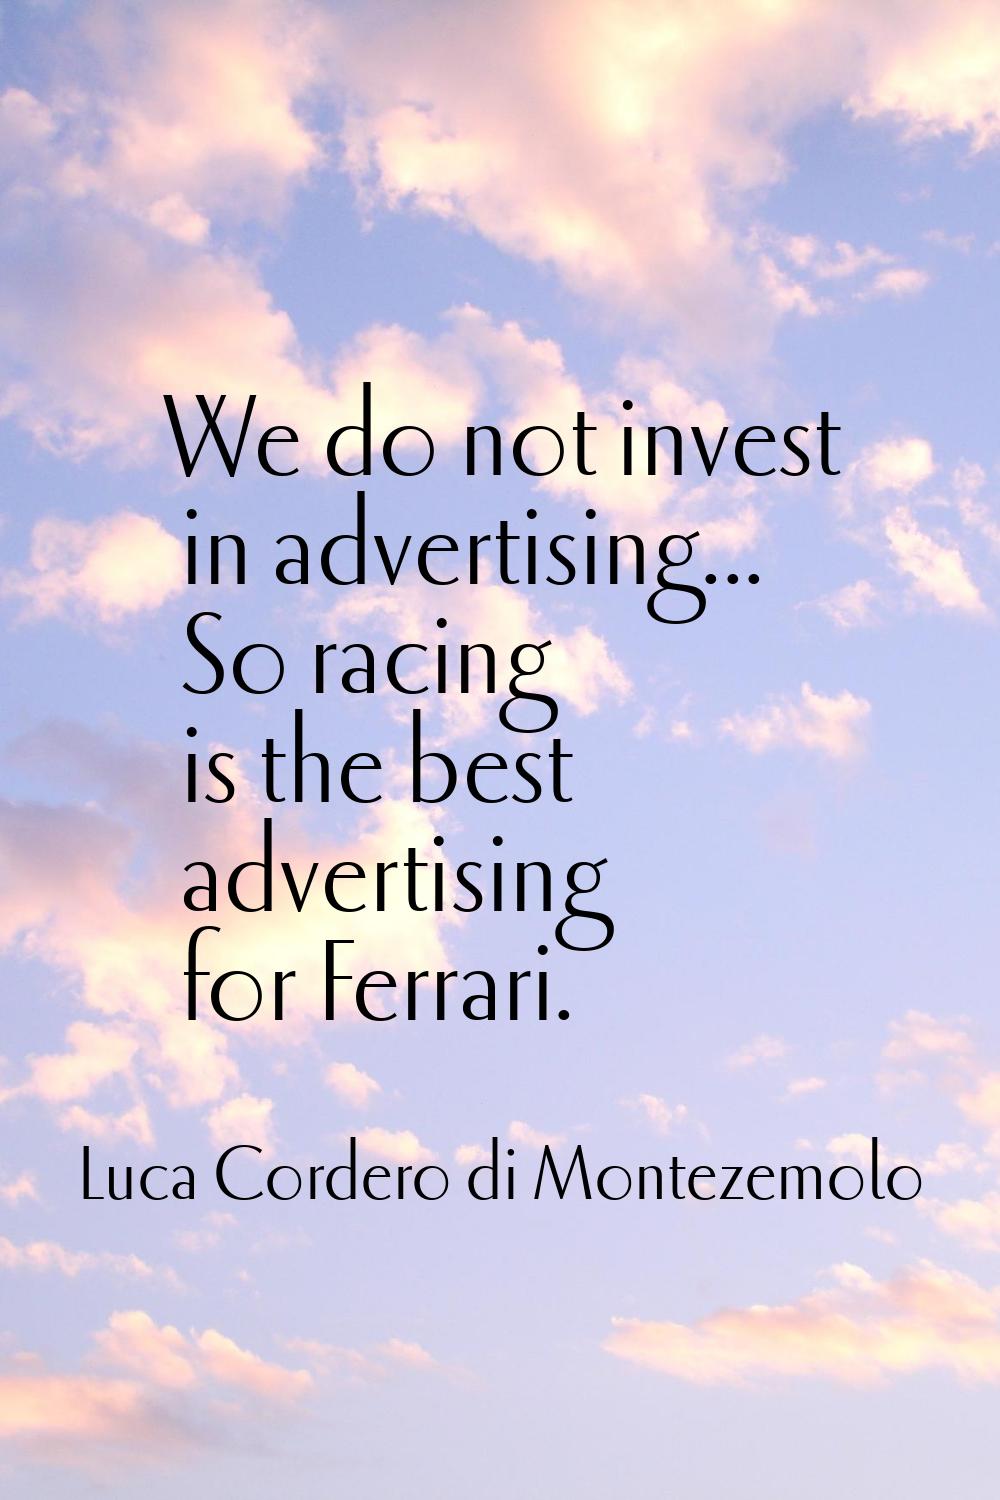 We do not invest in advertising... So racing is the best advertising for Ferrari.